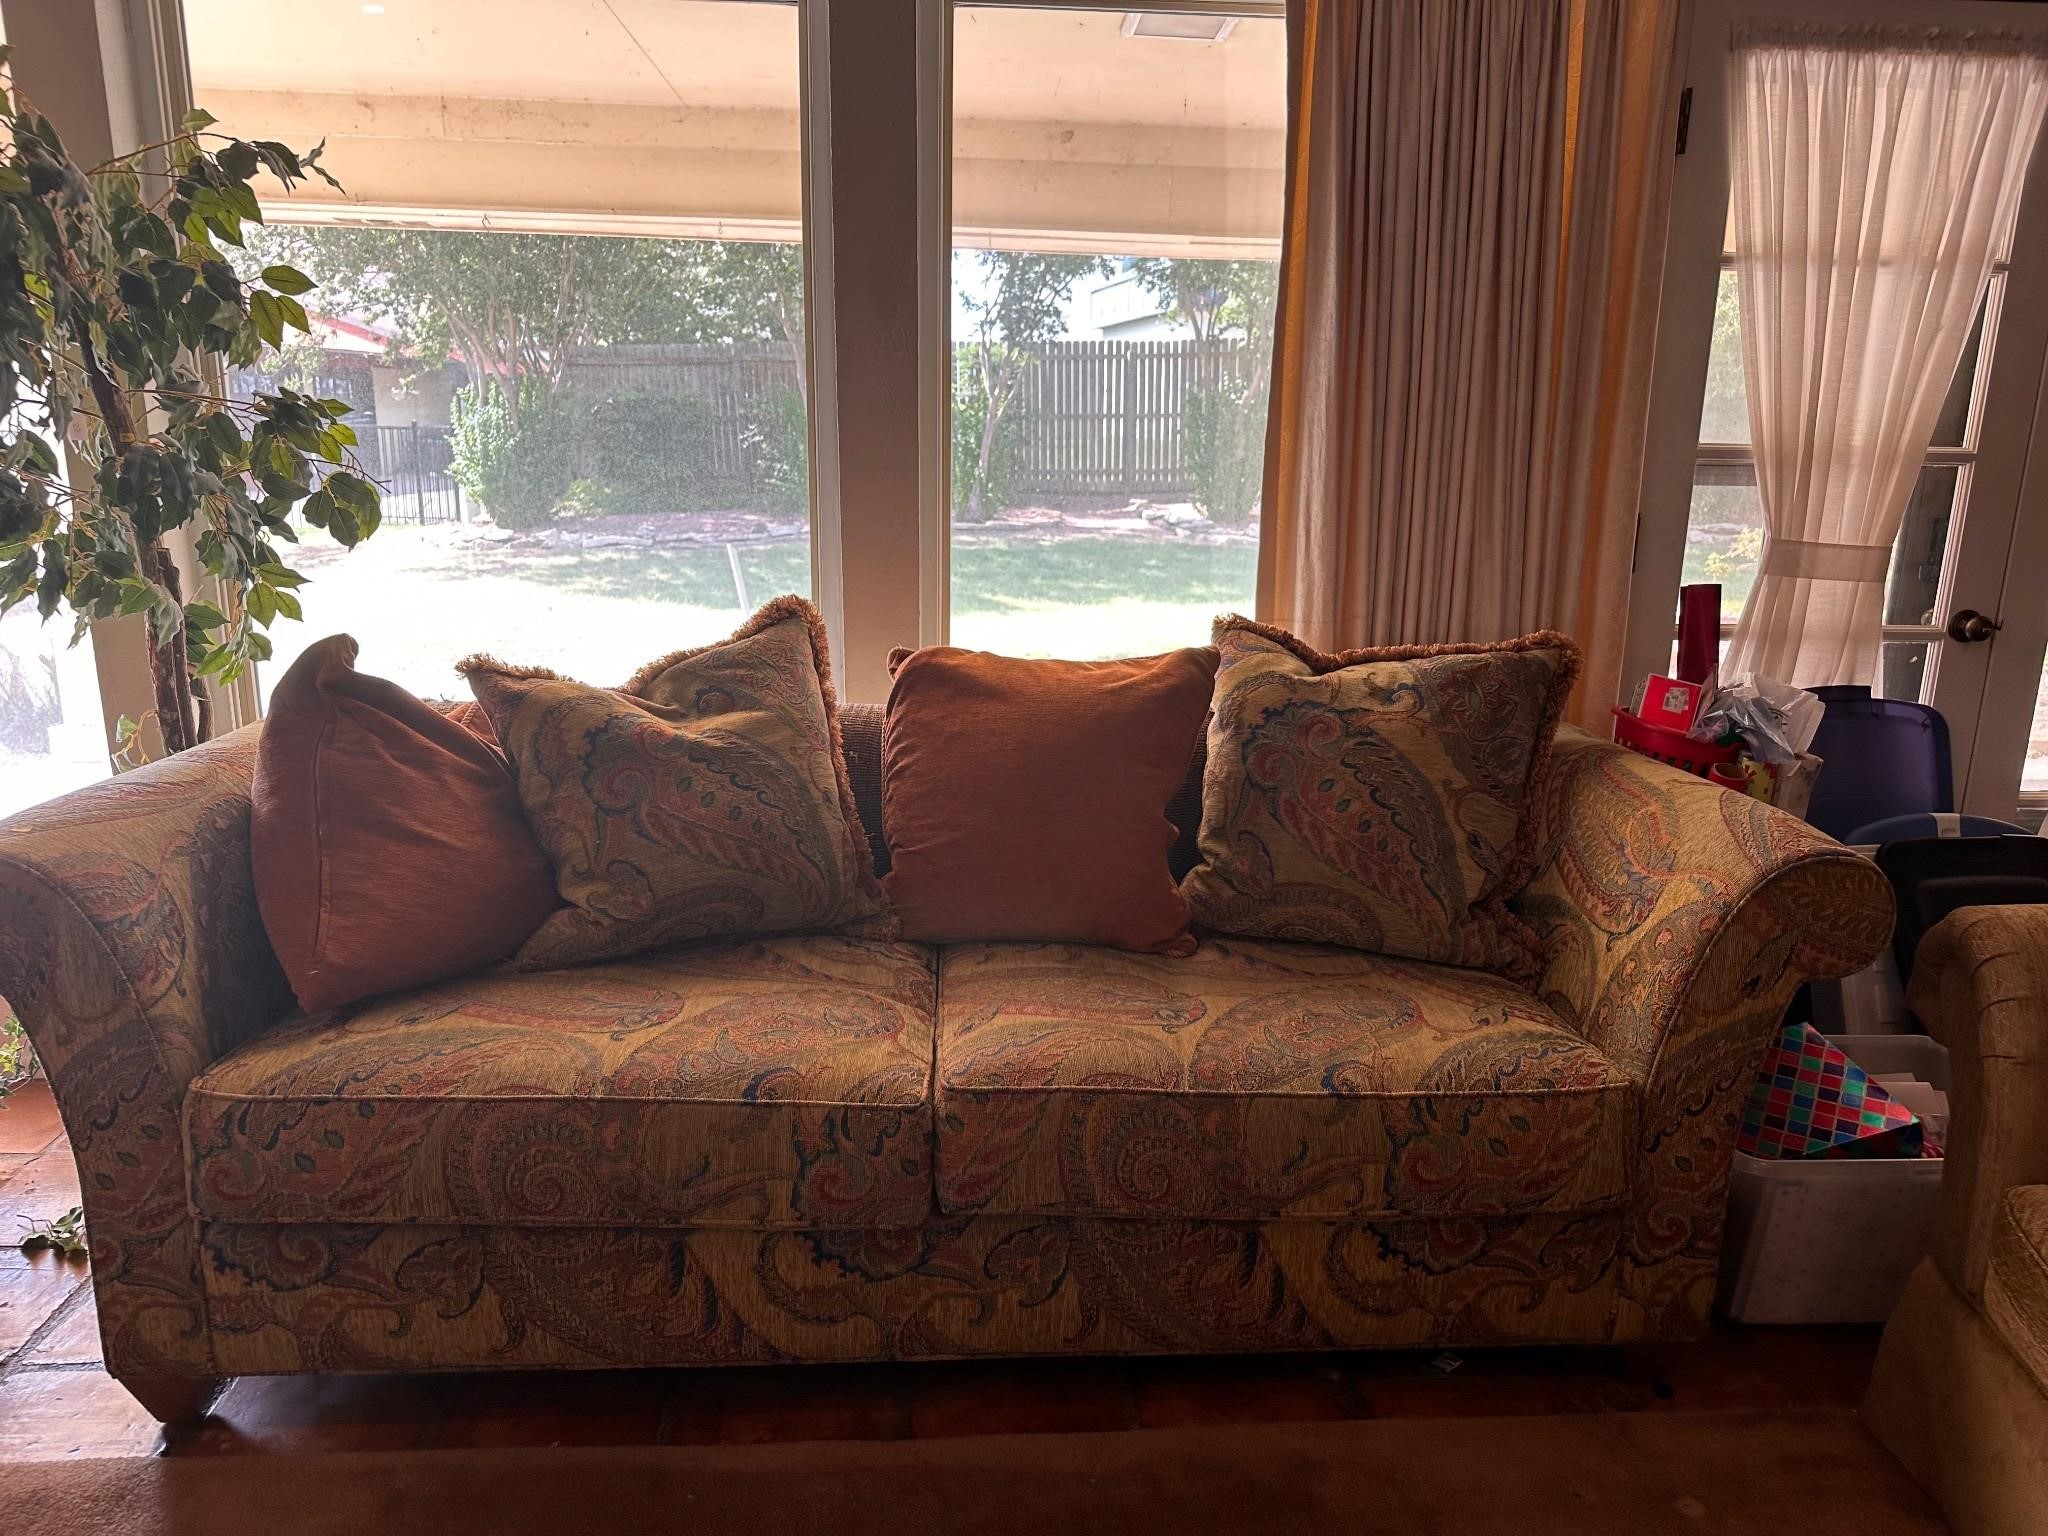 Paisley couch with down cushions